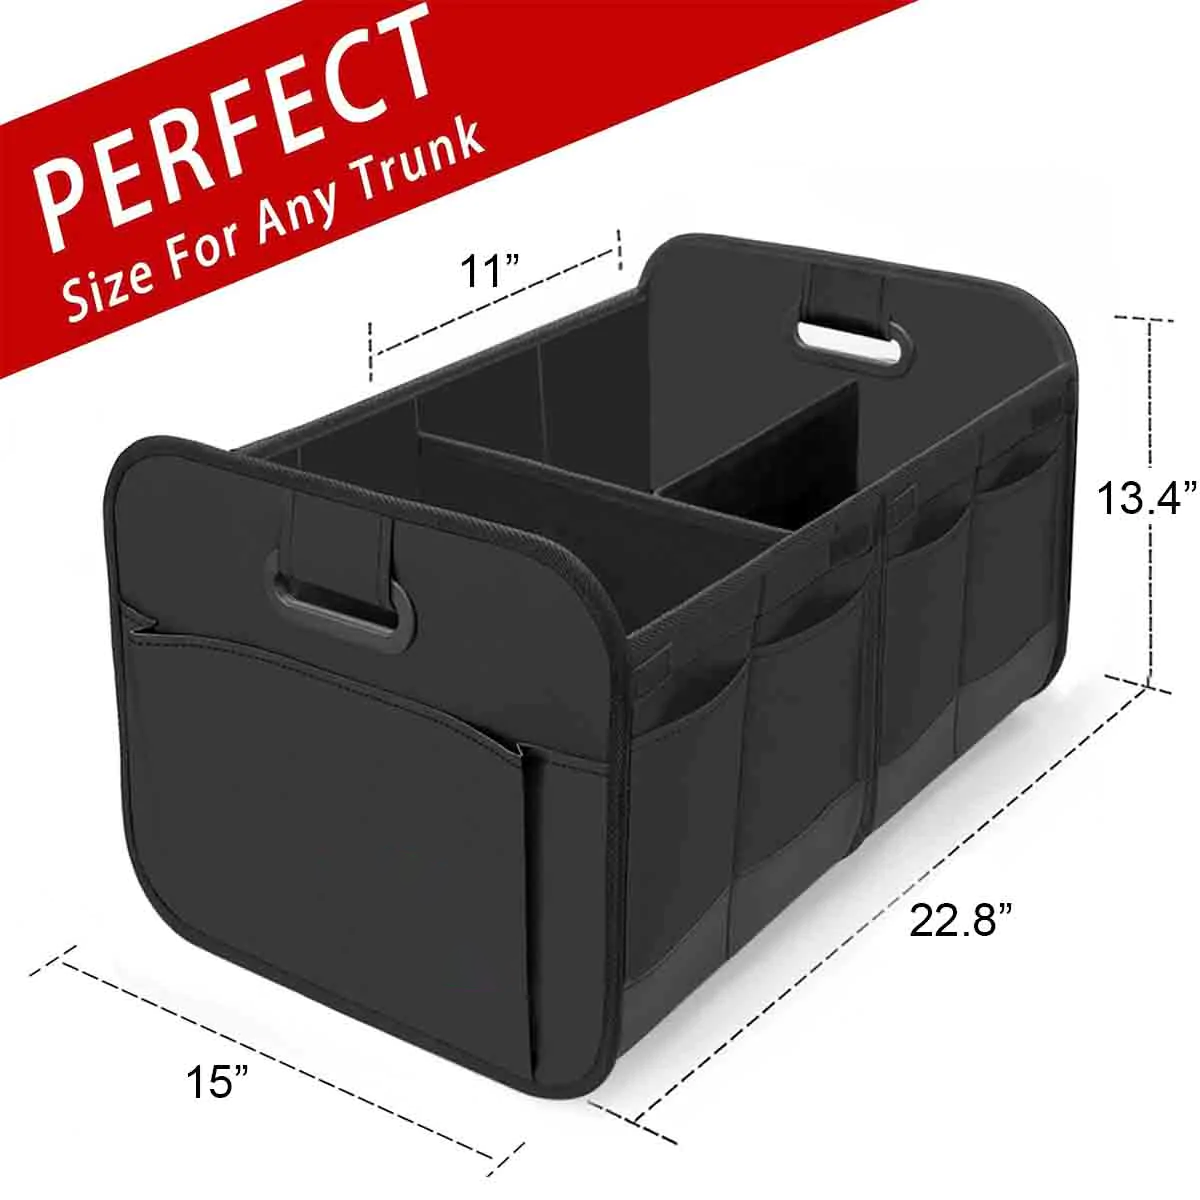 Custom Text For Car Trunk Organizer Storage, Compatible with All Cars, Reinforced Handles, Collapsible Multi, Compartment Car Organizers, Foldable and Waterproof, 600D Oxford Polyester JE12995